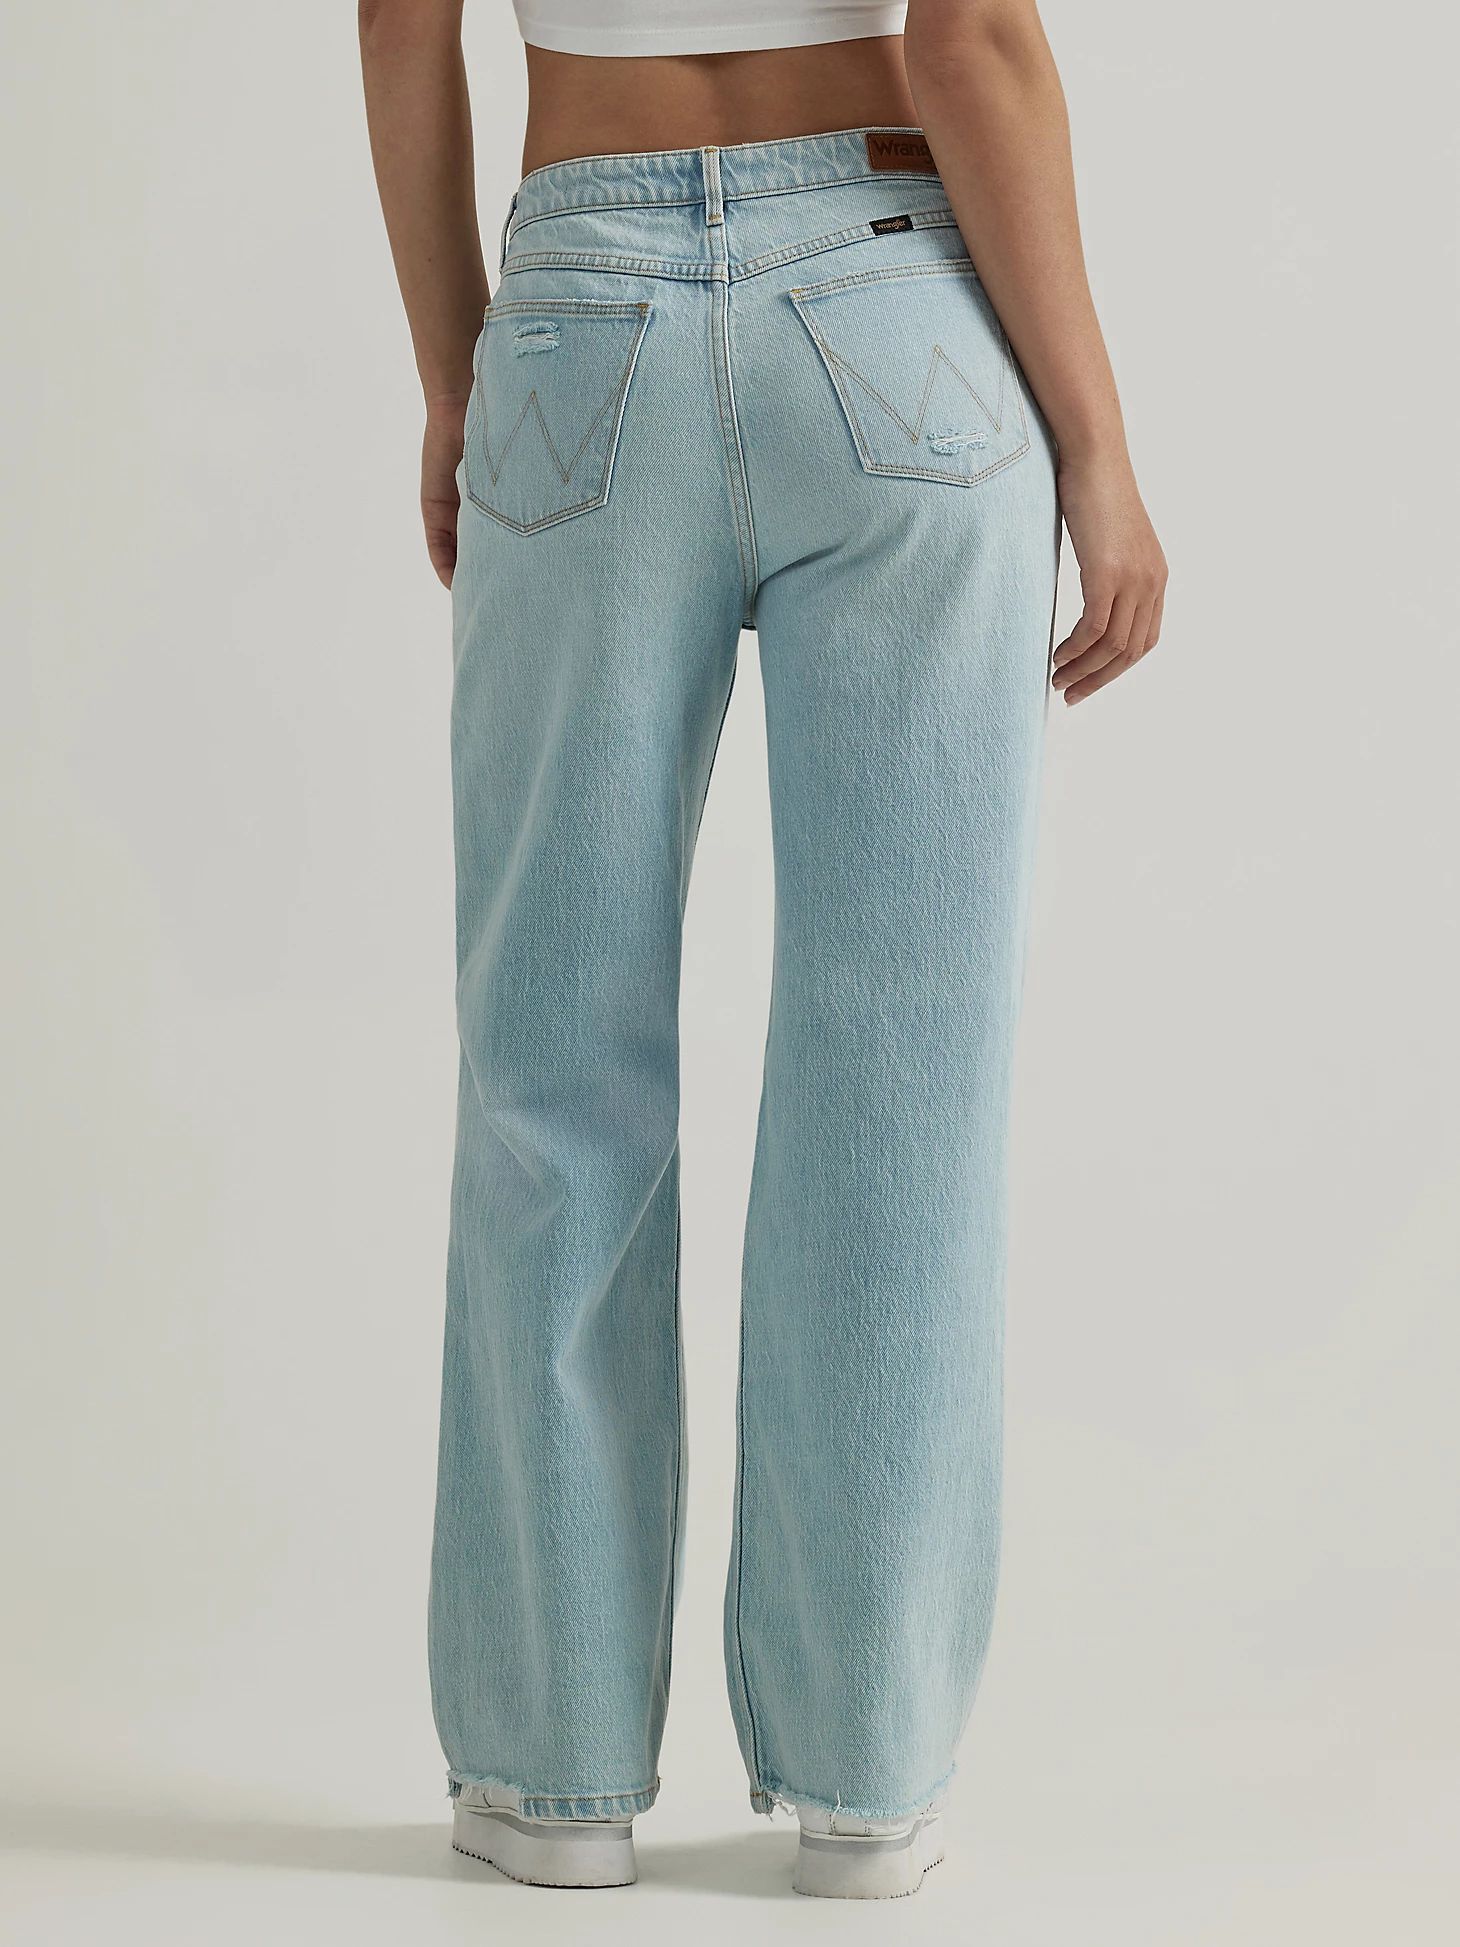 Women's Mid Rise Loose Jean in Icy Blue | Wrangler